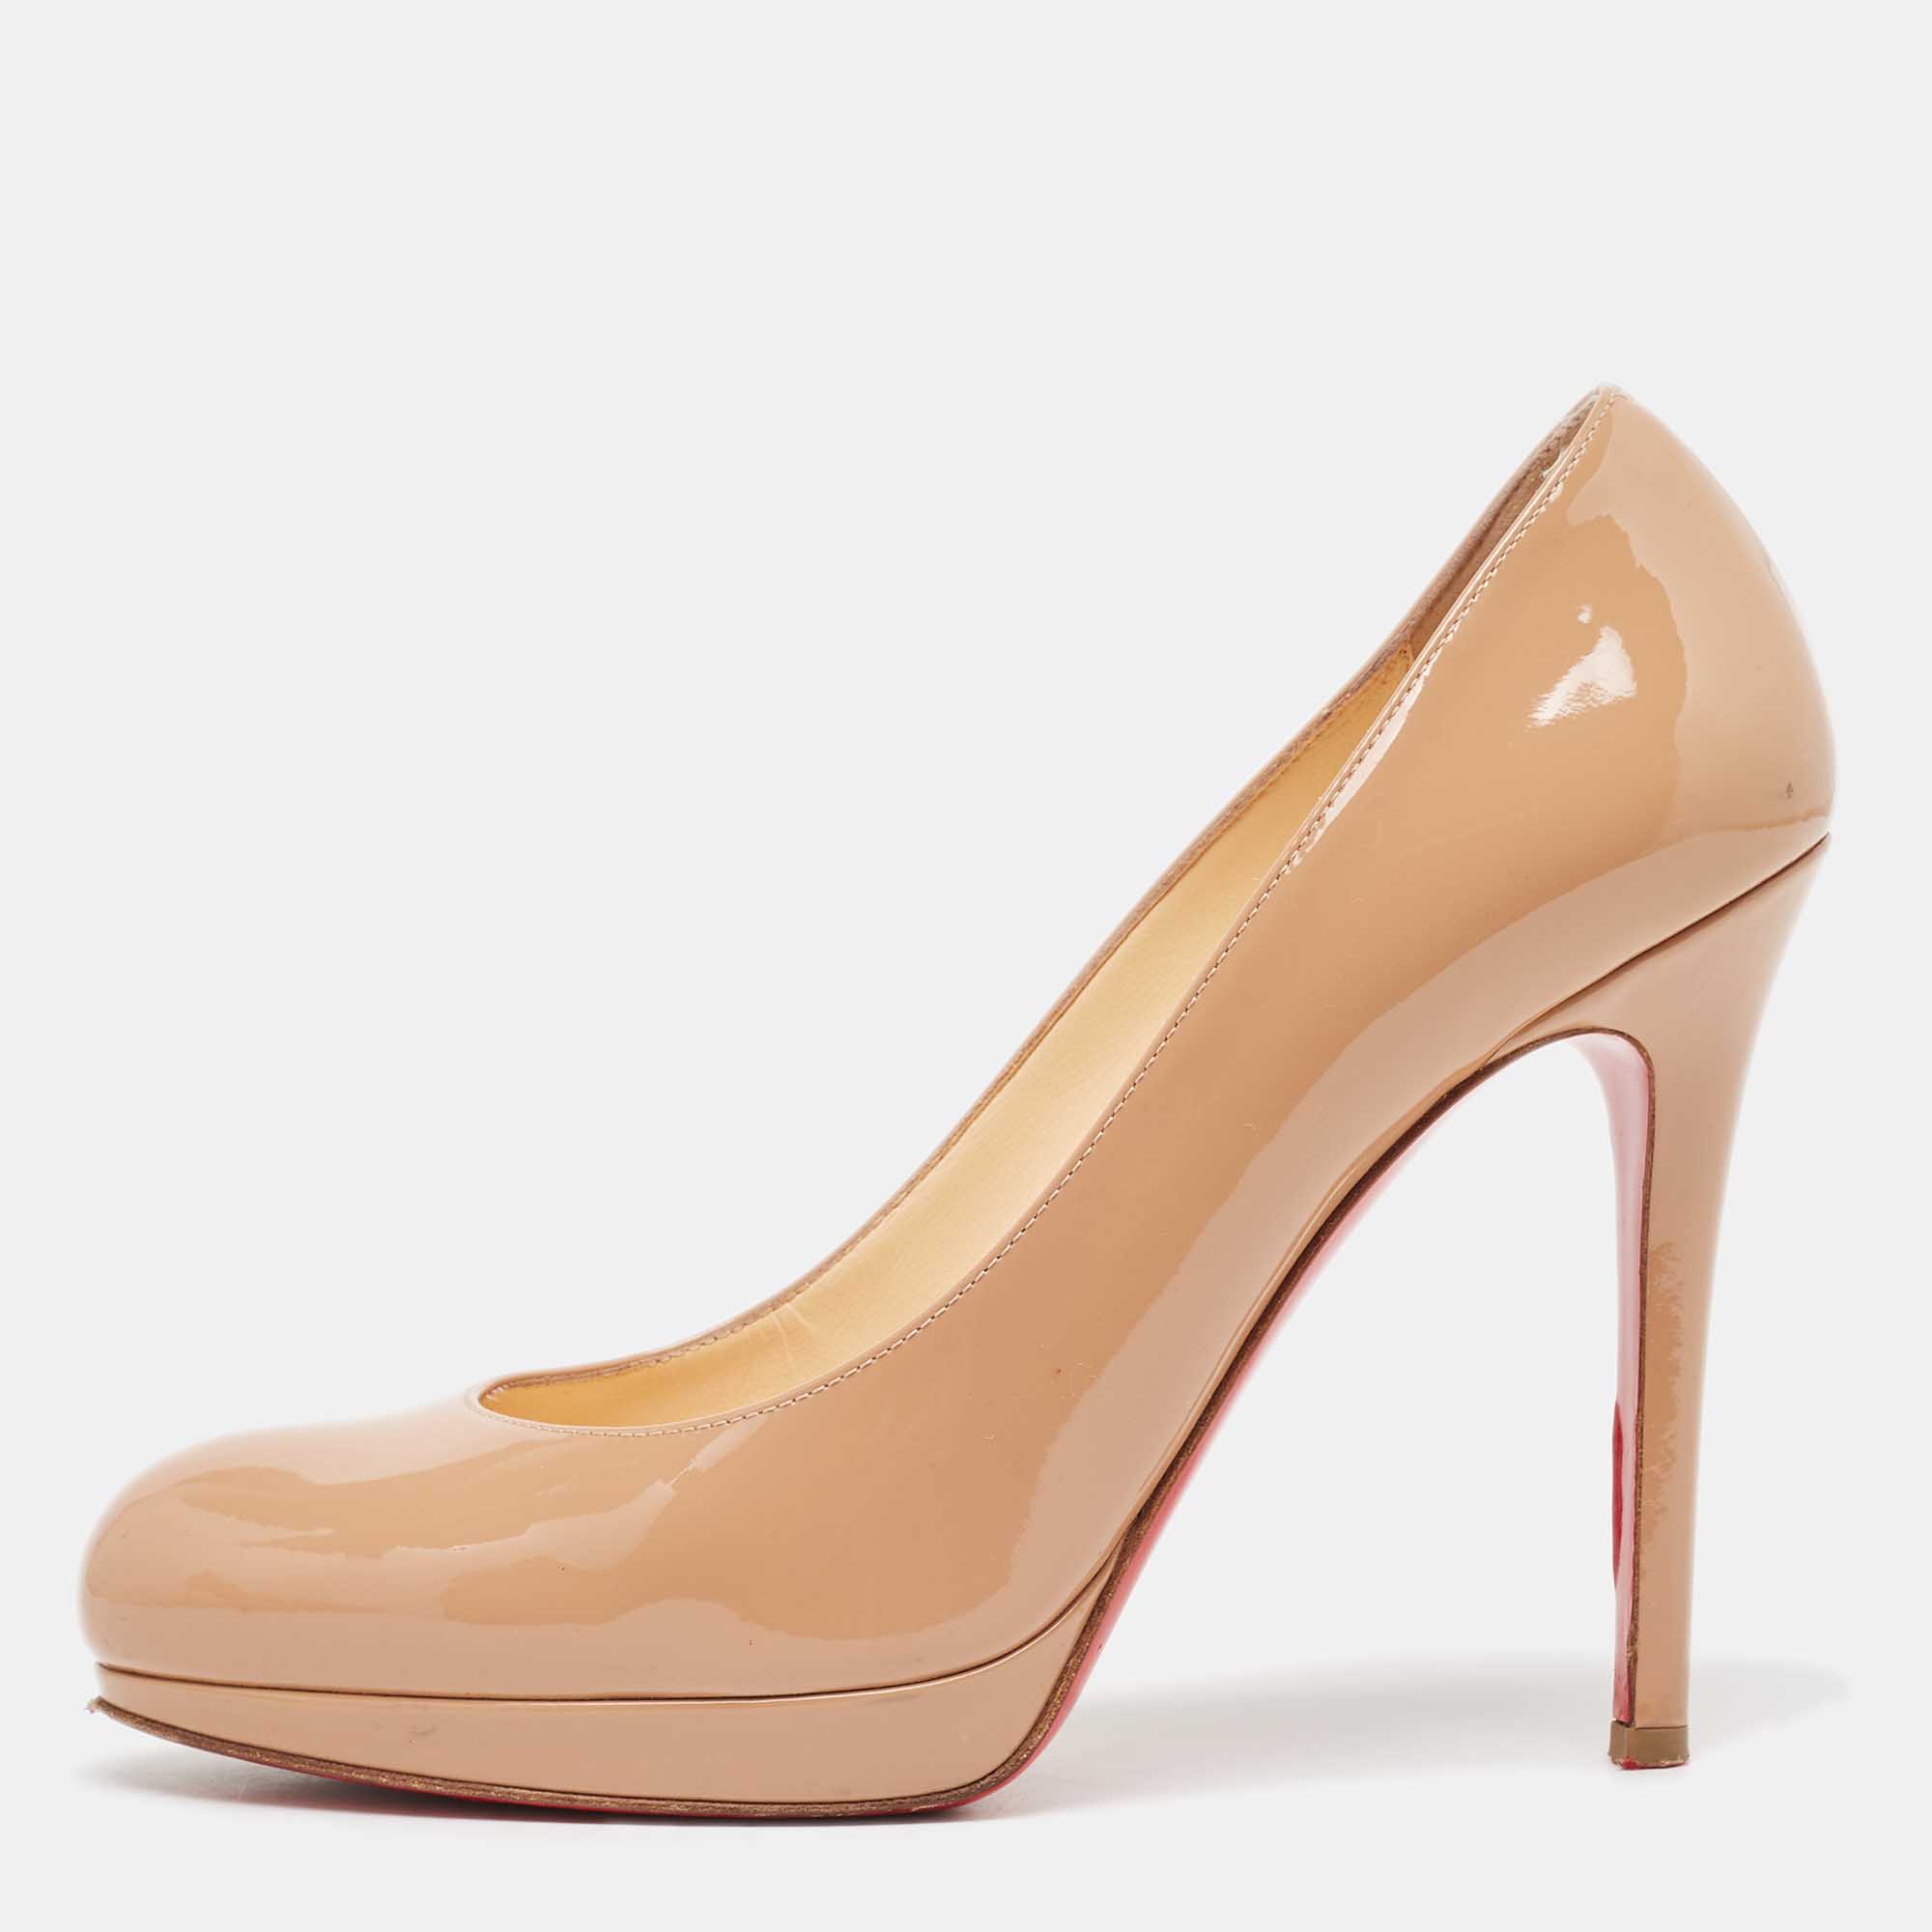 Christian louboutin beige patent new simple pumps size 36.5